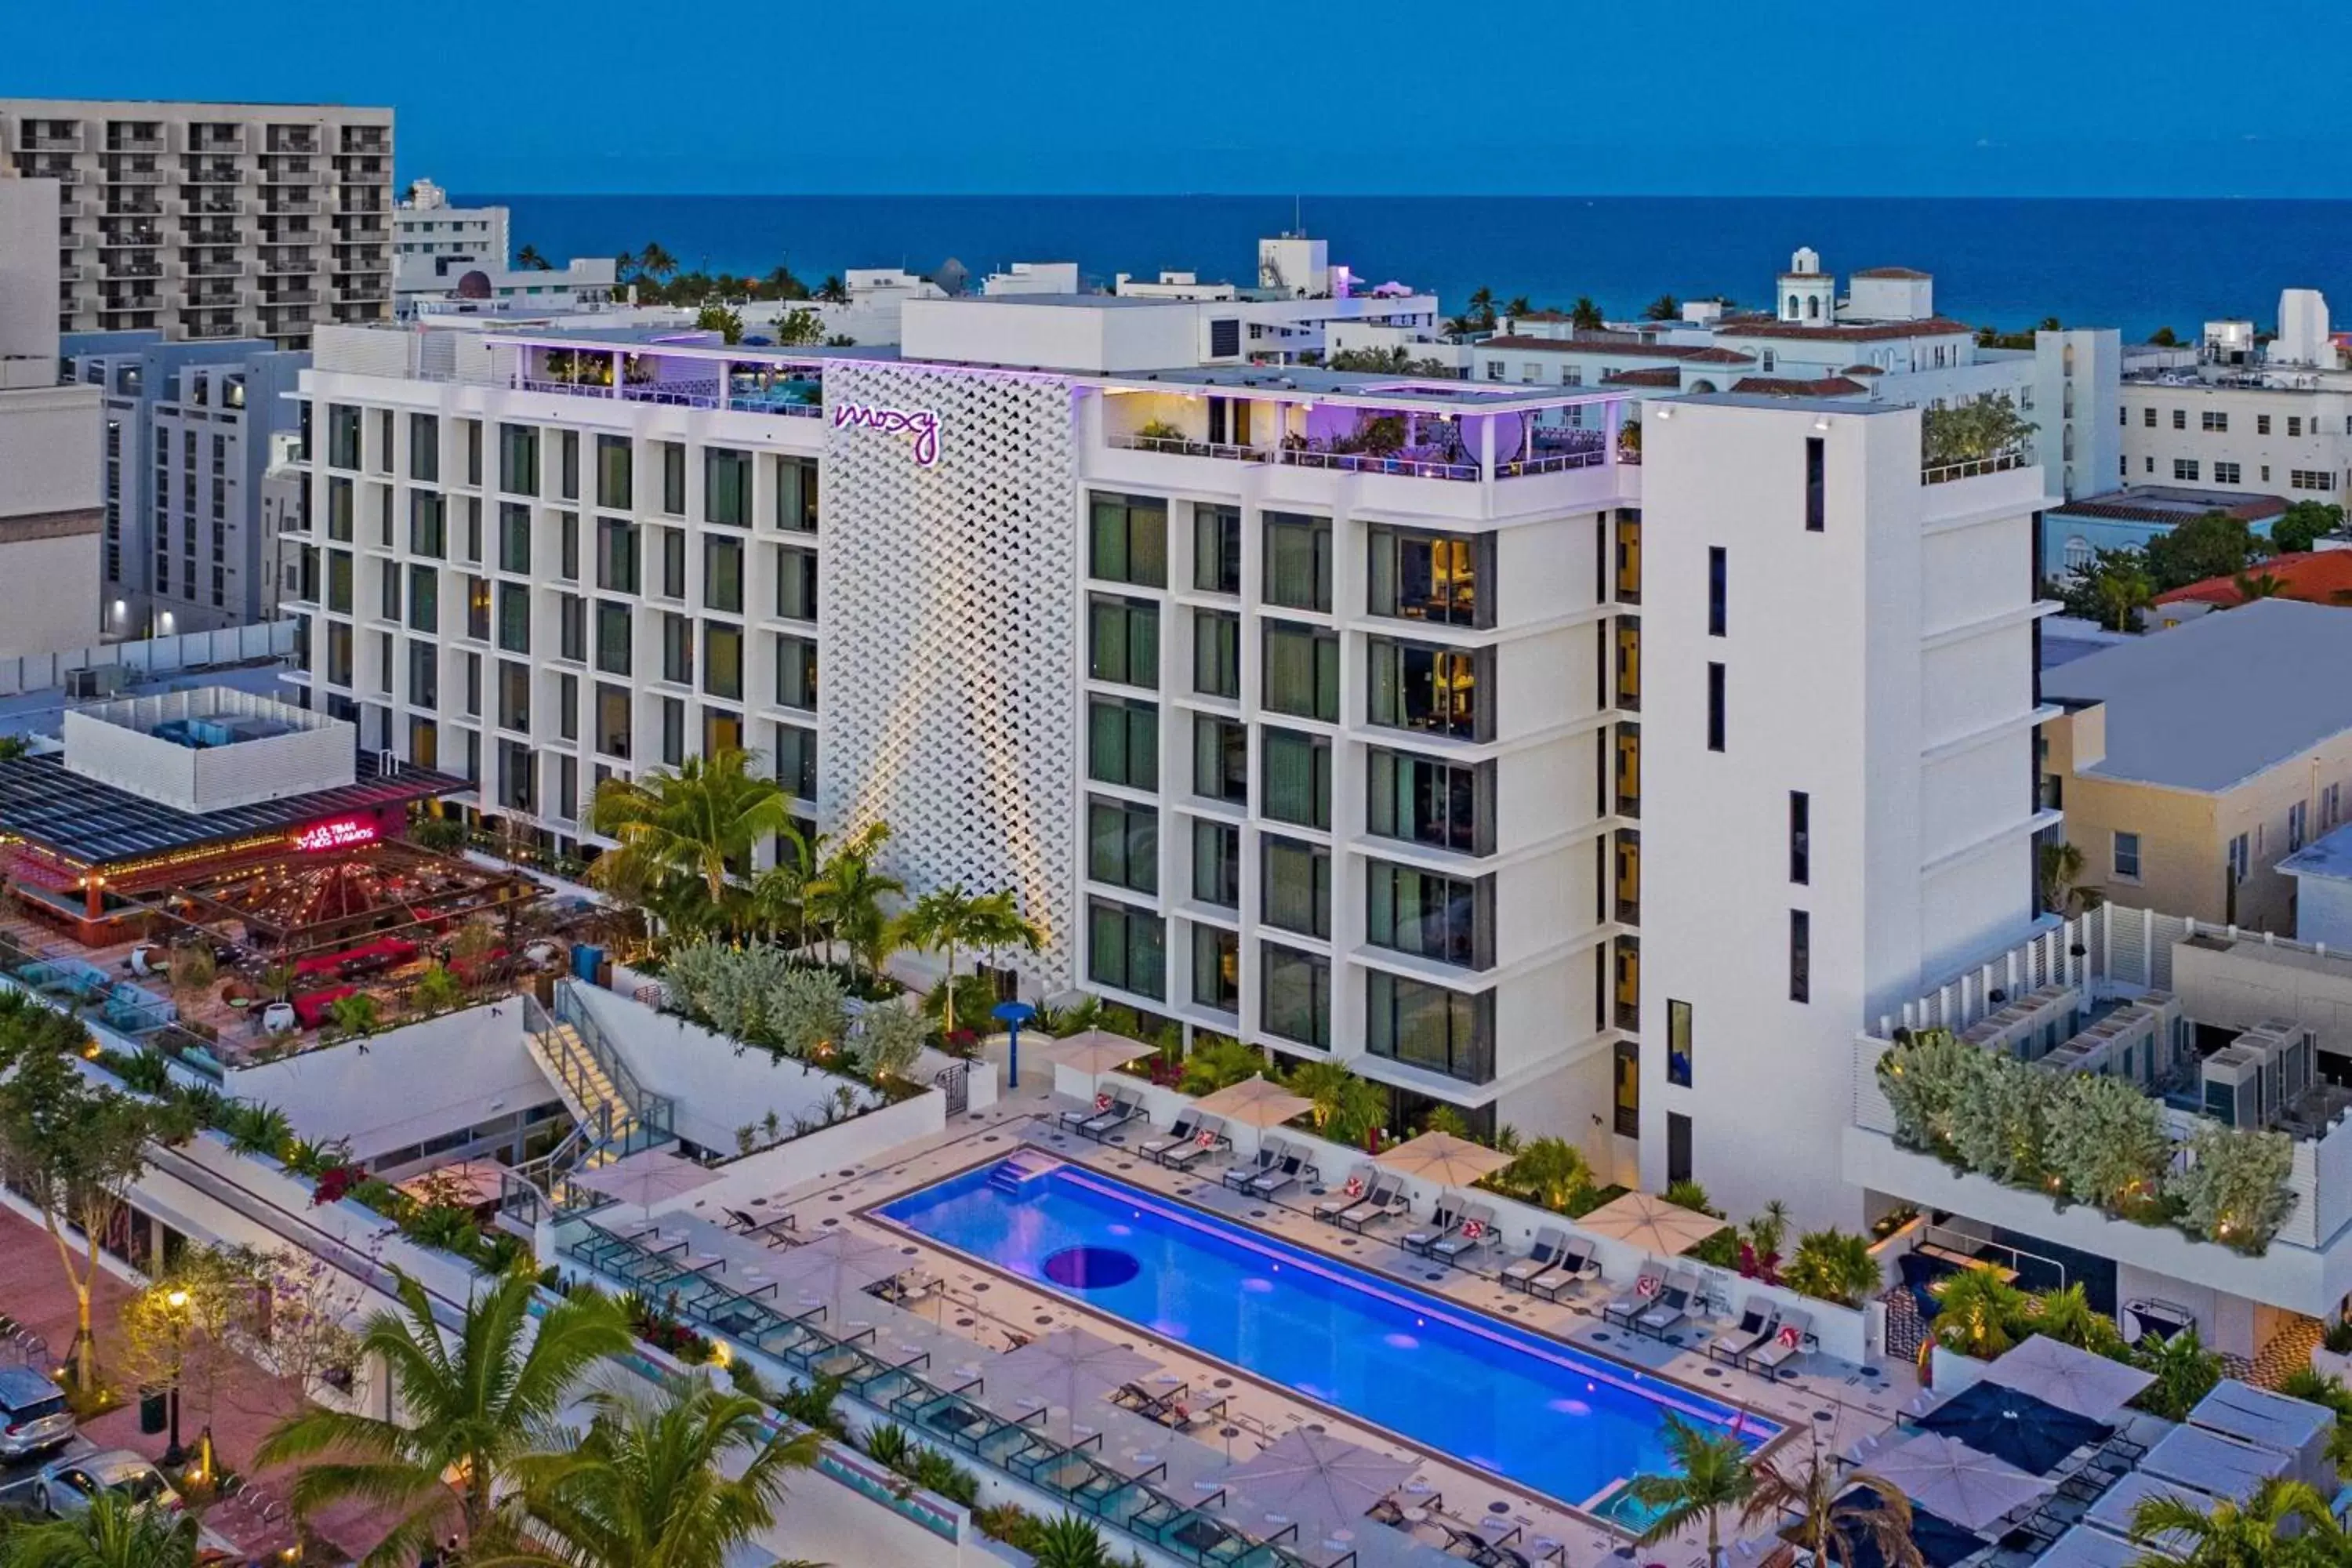 Property building, Pool View in Moxy Miami South Beach